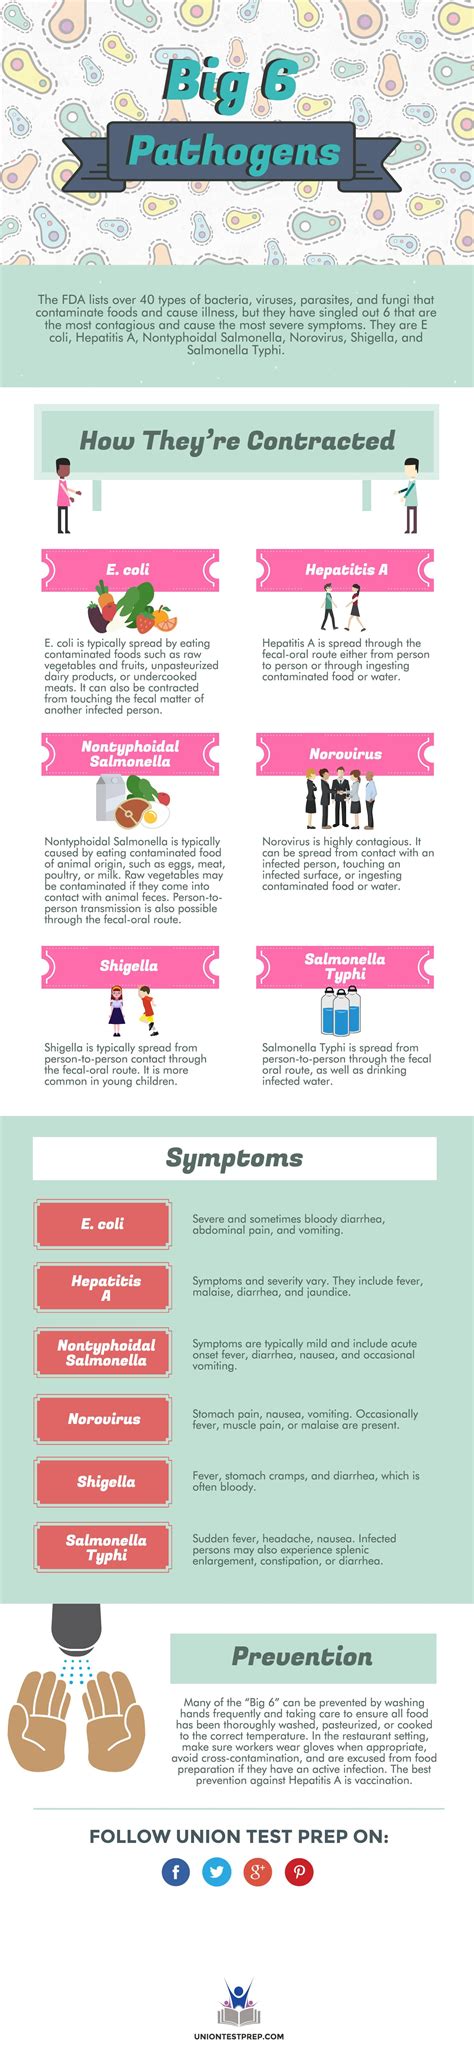 Big 6 Pathogens | Food safety posters, Food safety, Food safety and ...